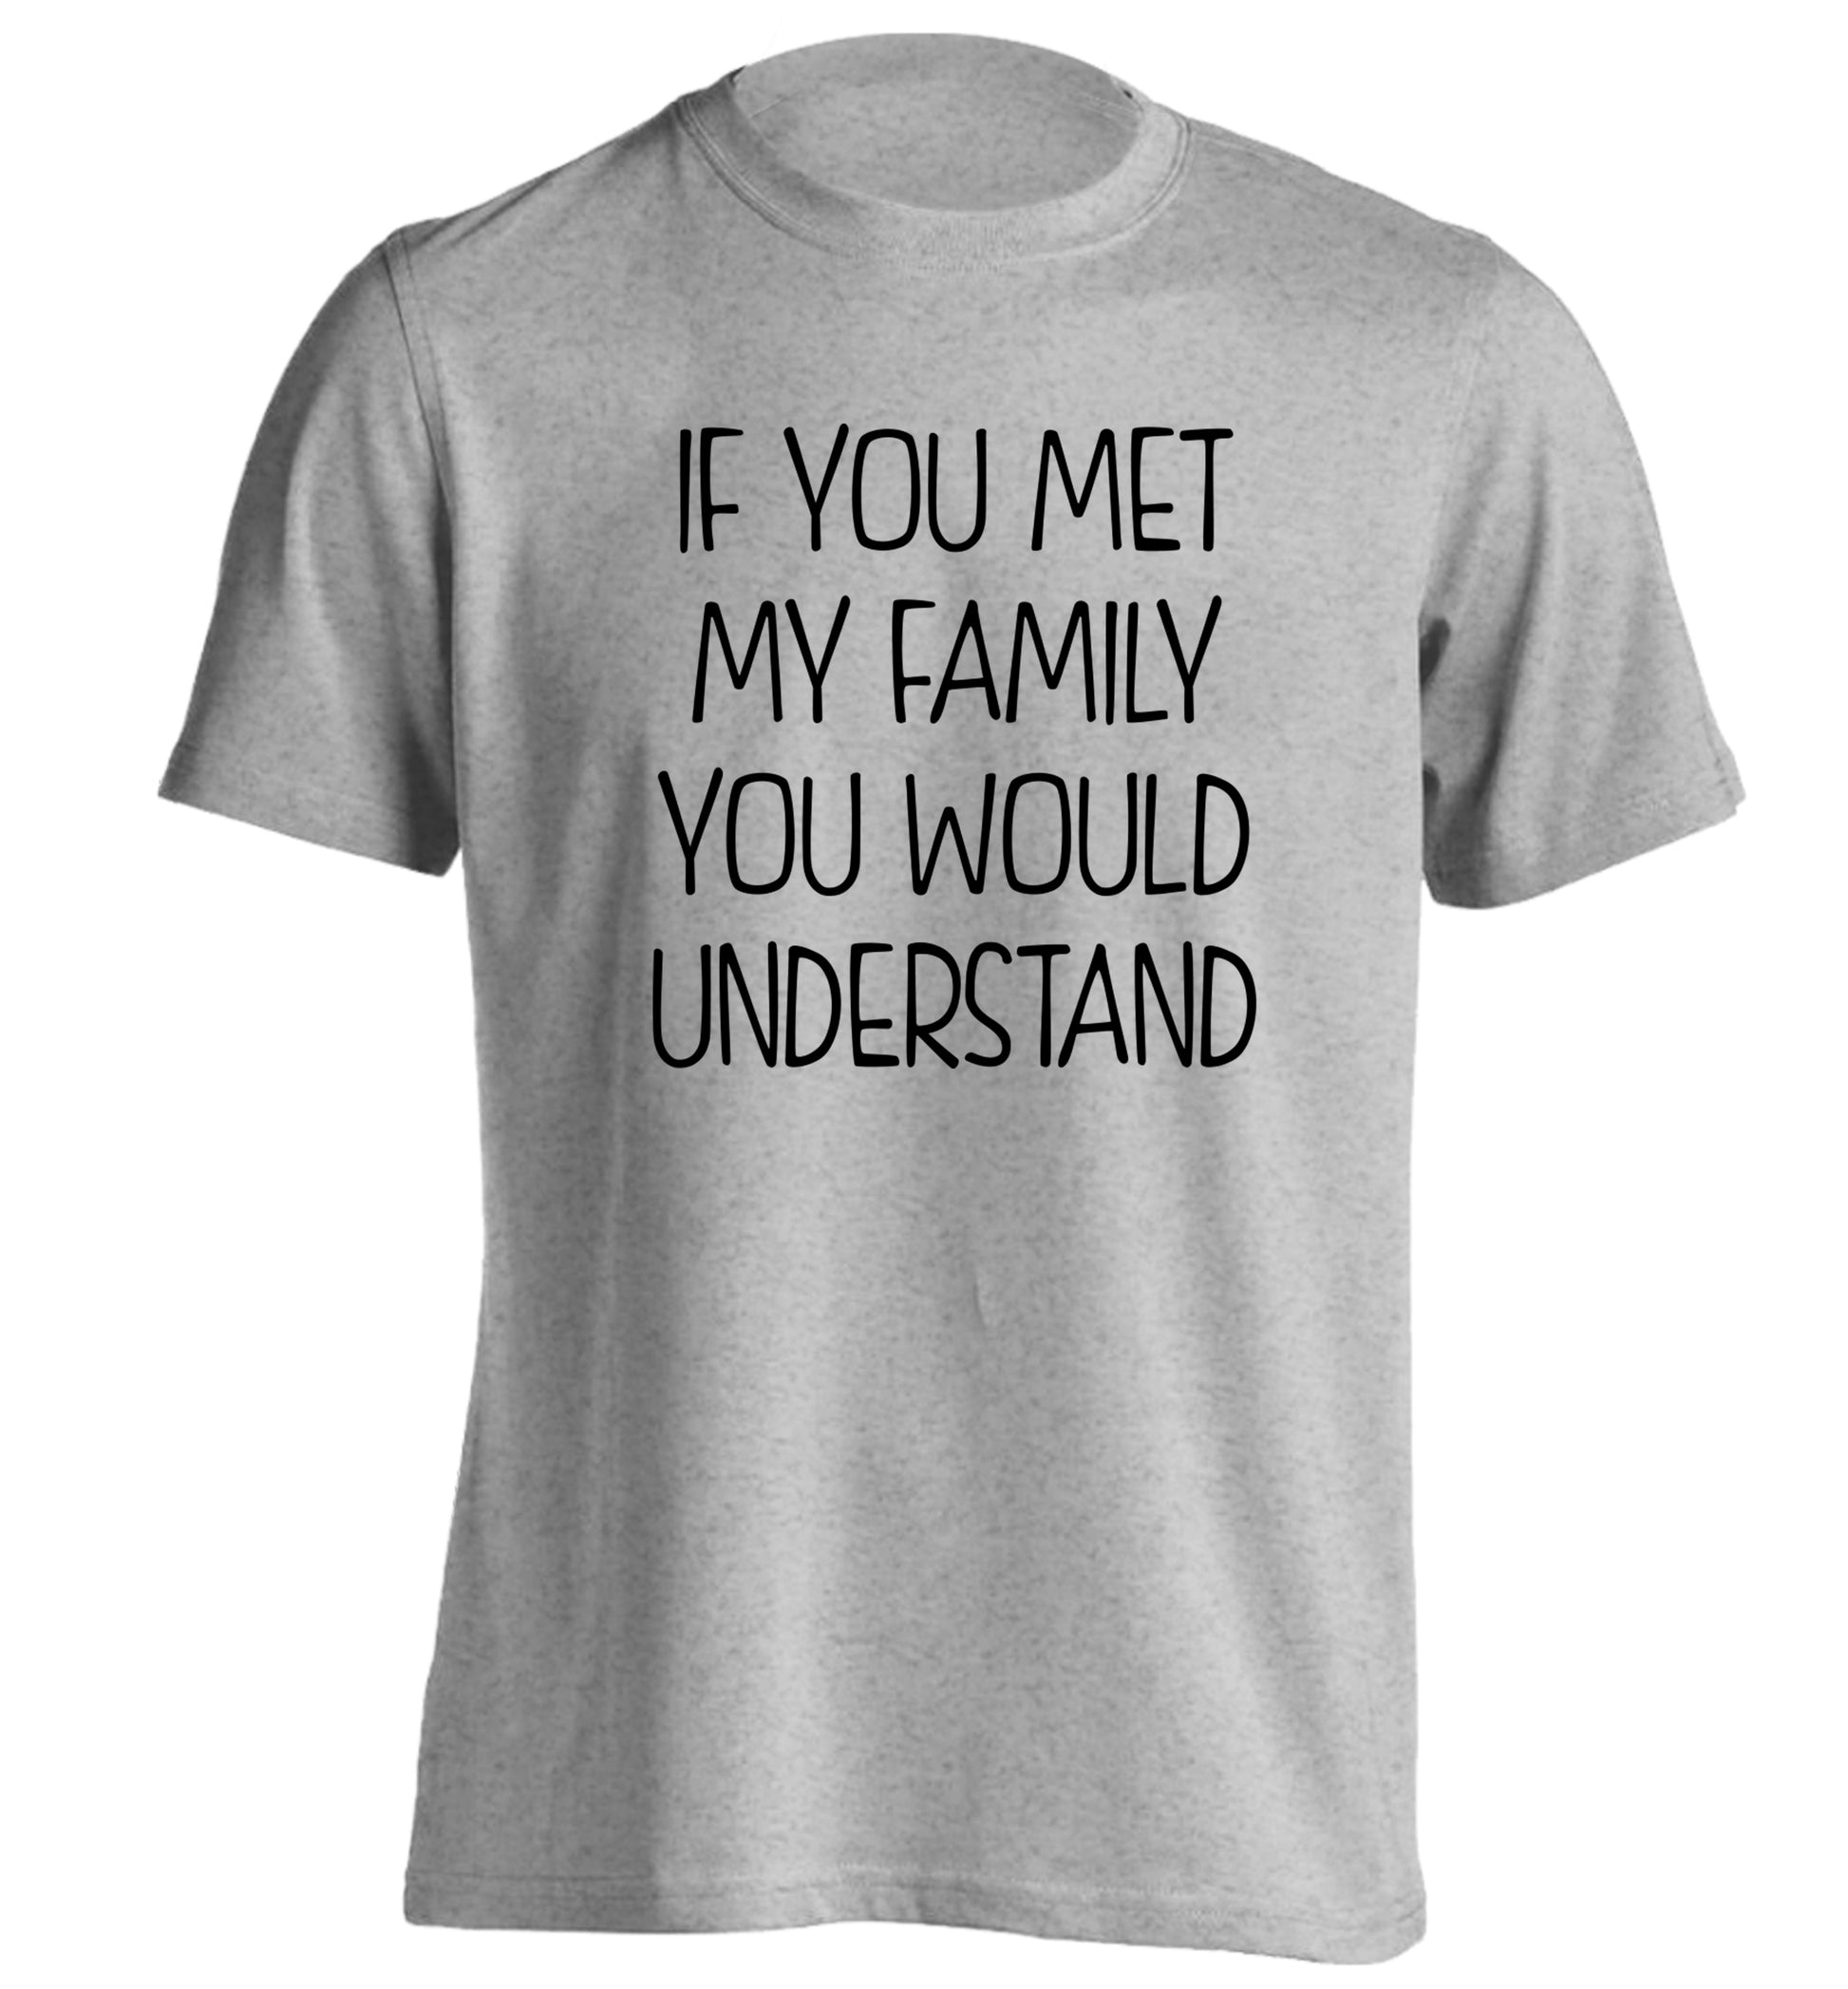 If you met my family you would understand adults unisex grey Tshirt 2XL